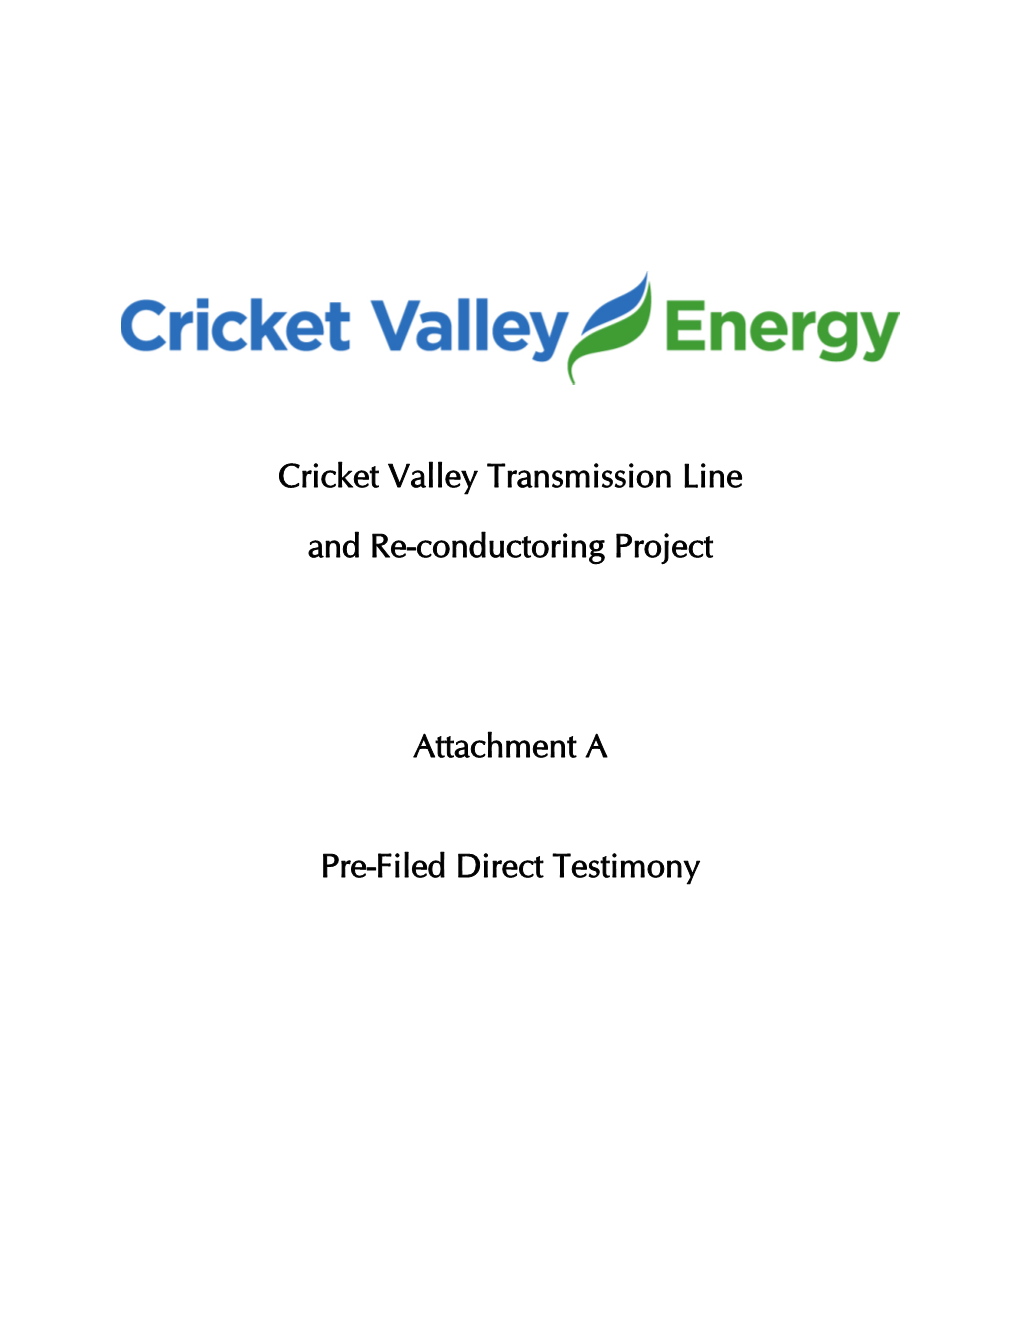 Cricket Valley Transmission Line and Re-Conductoring Project